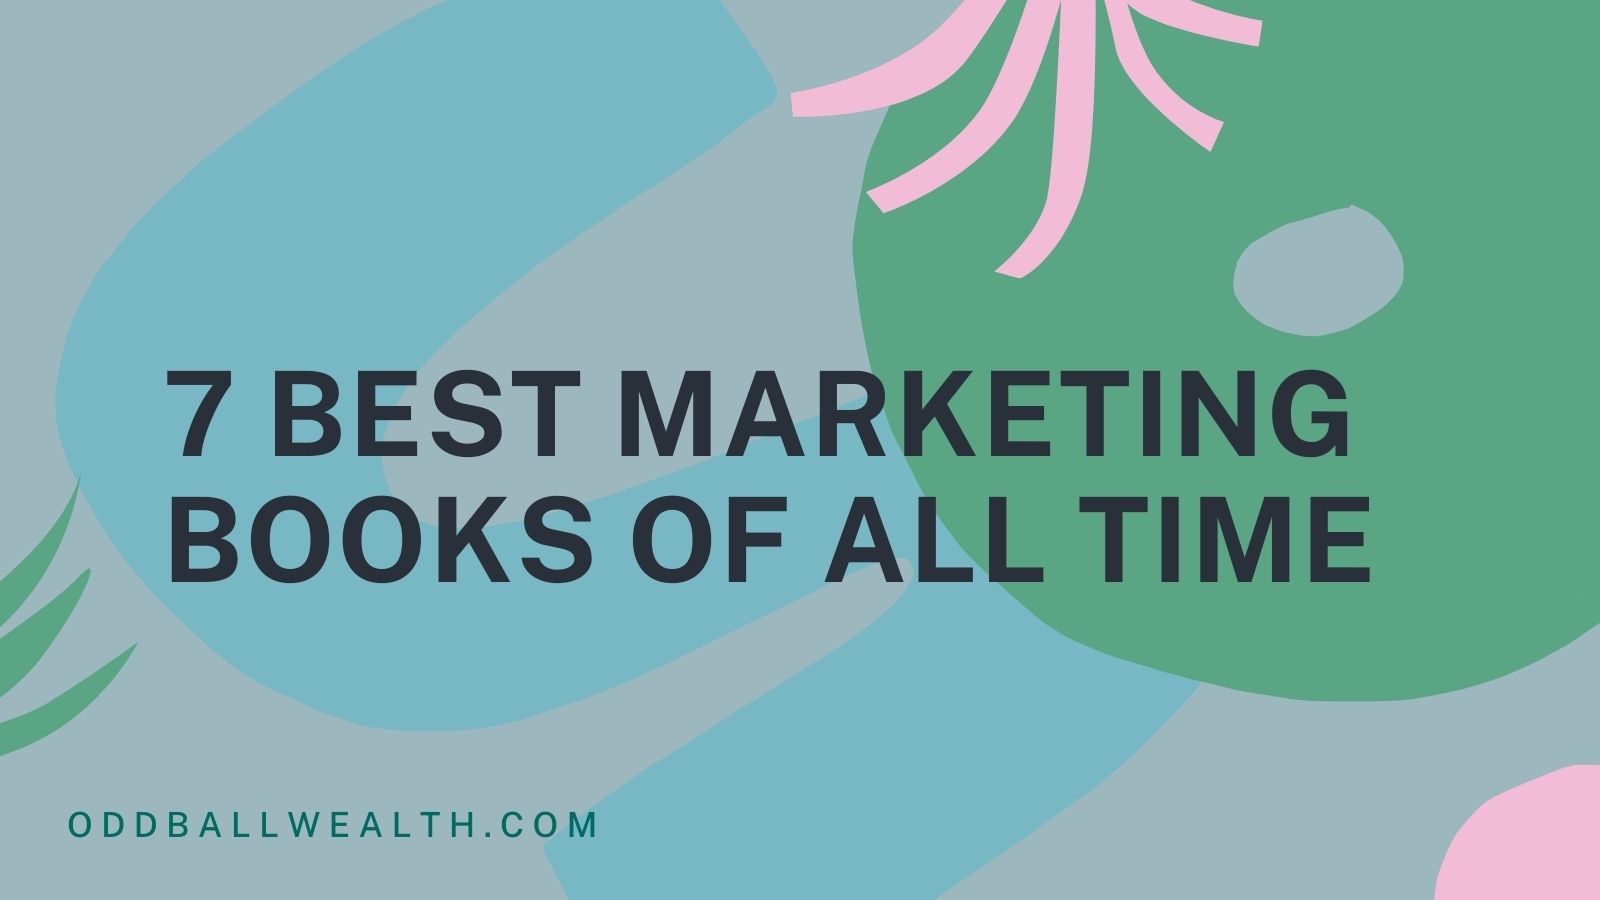 Best Marketing Books of All Time